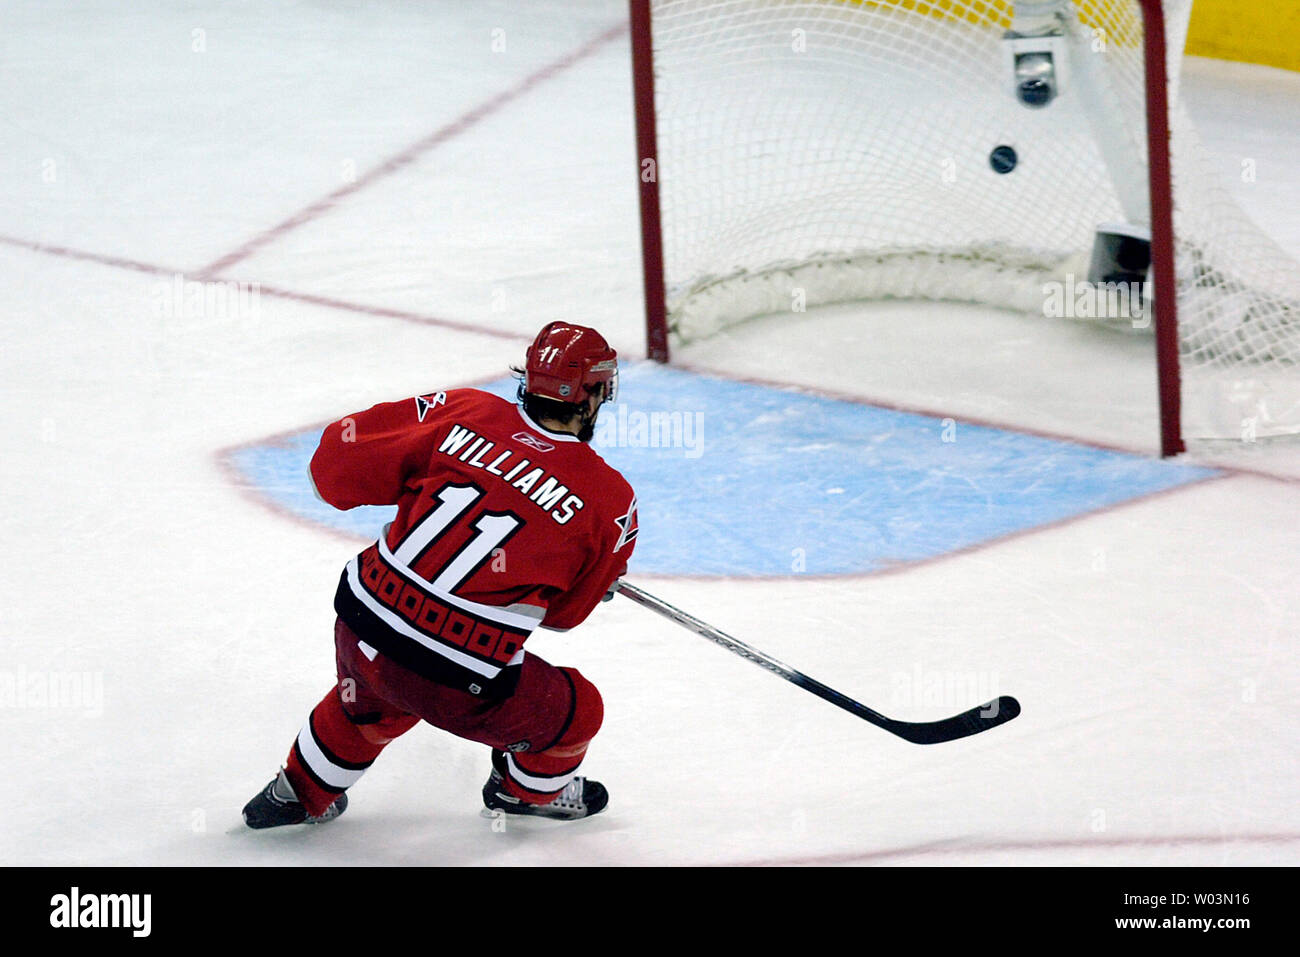 carolina-hurricanes-justin-williams-scores-the-final-goal-against-the-edmonton-oilers-in-an-empty-net-during-game-7-of-the-nhl-stanley-cup-finals-at-the-rbc-center-in-raleigh-nc-june-19-2006-carolina-won-3-1-to-capture-the-franchises-first-stanley-cup-upi-photojeffrey-a-camarati-W03N16.jpg